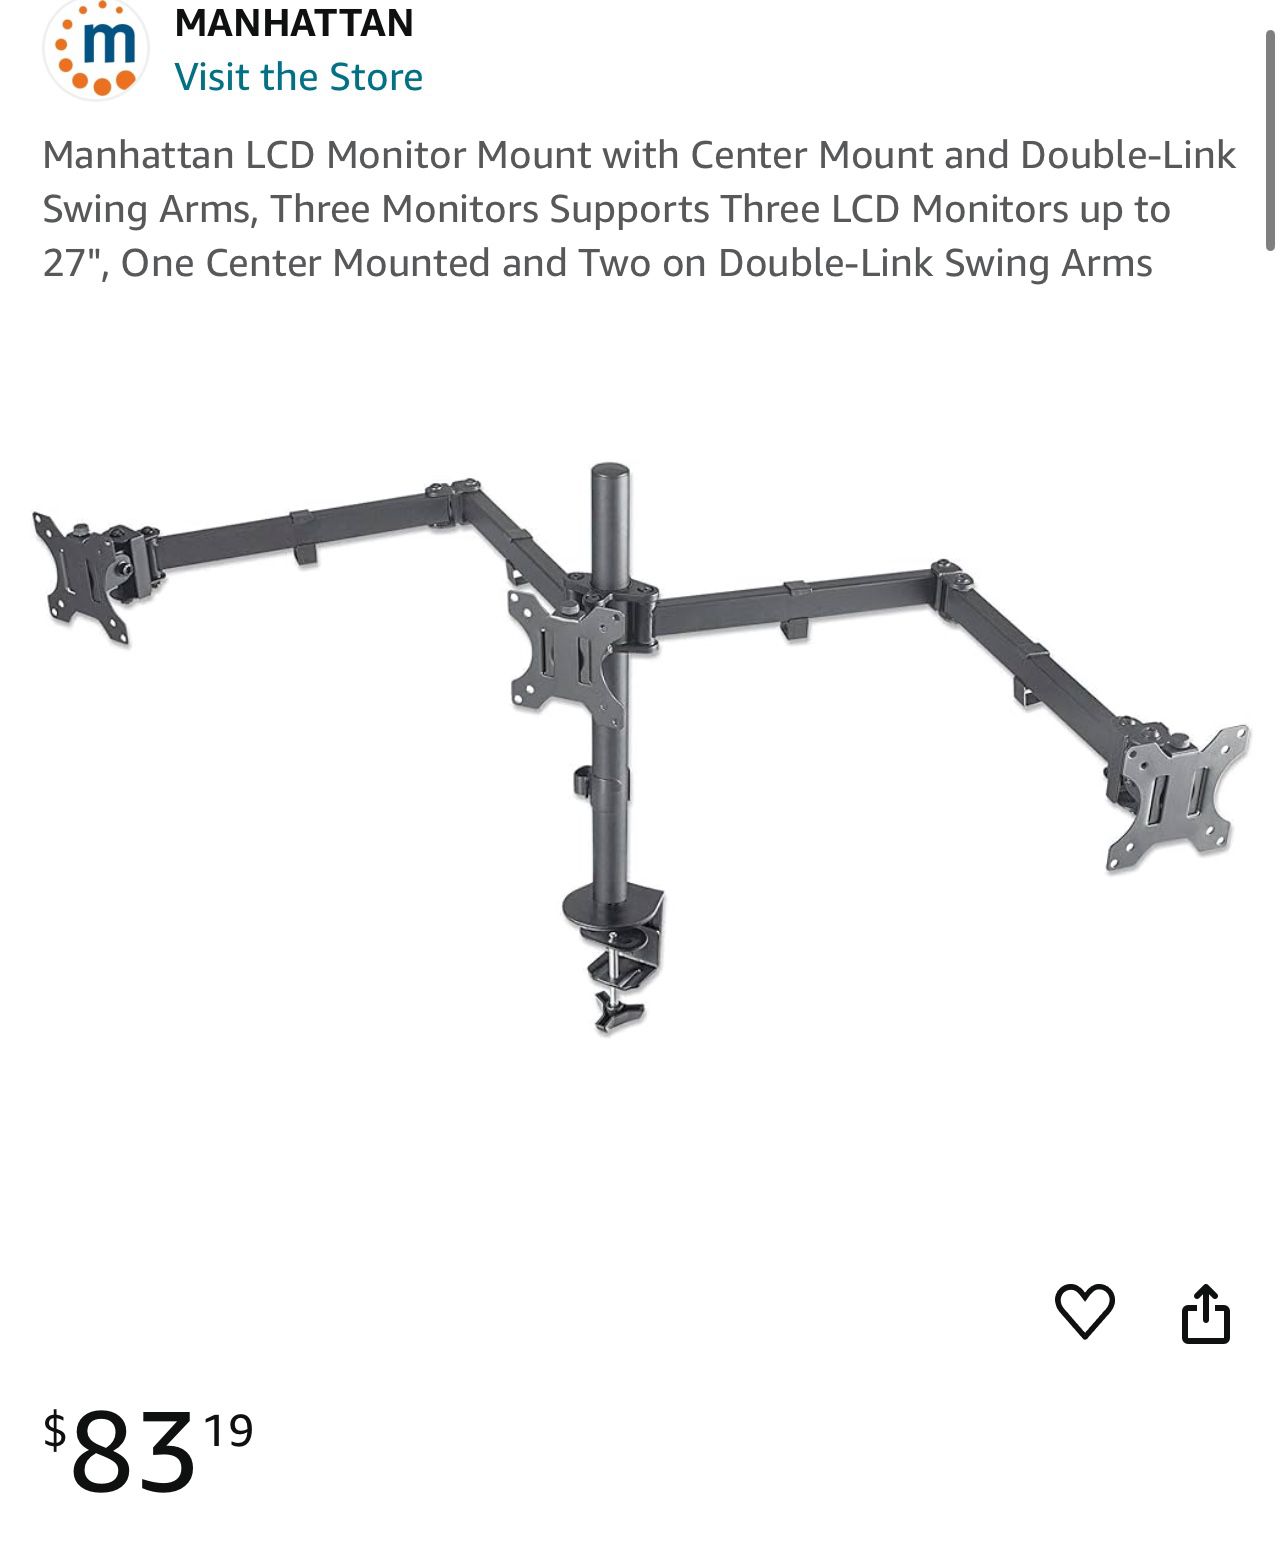 Manhattan LCD Monitor Mount with Center Mount and Double-Link Swing Arms